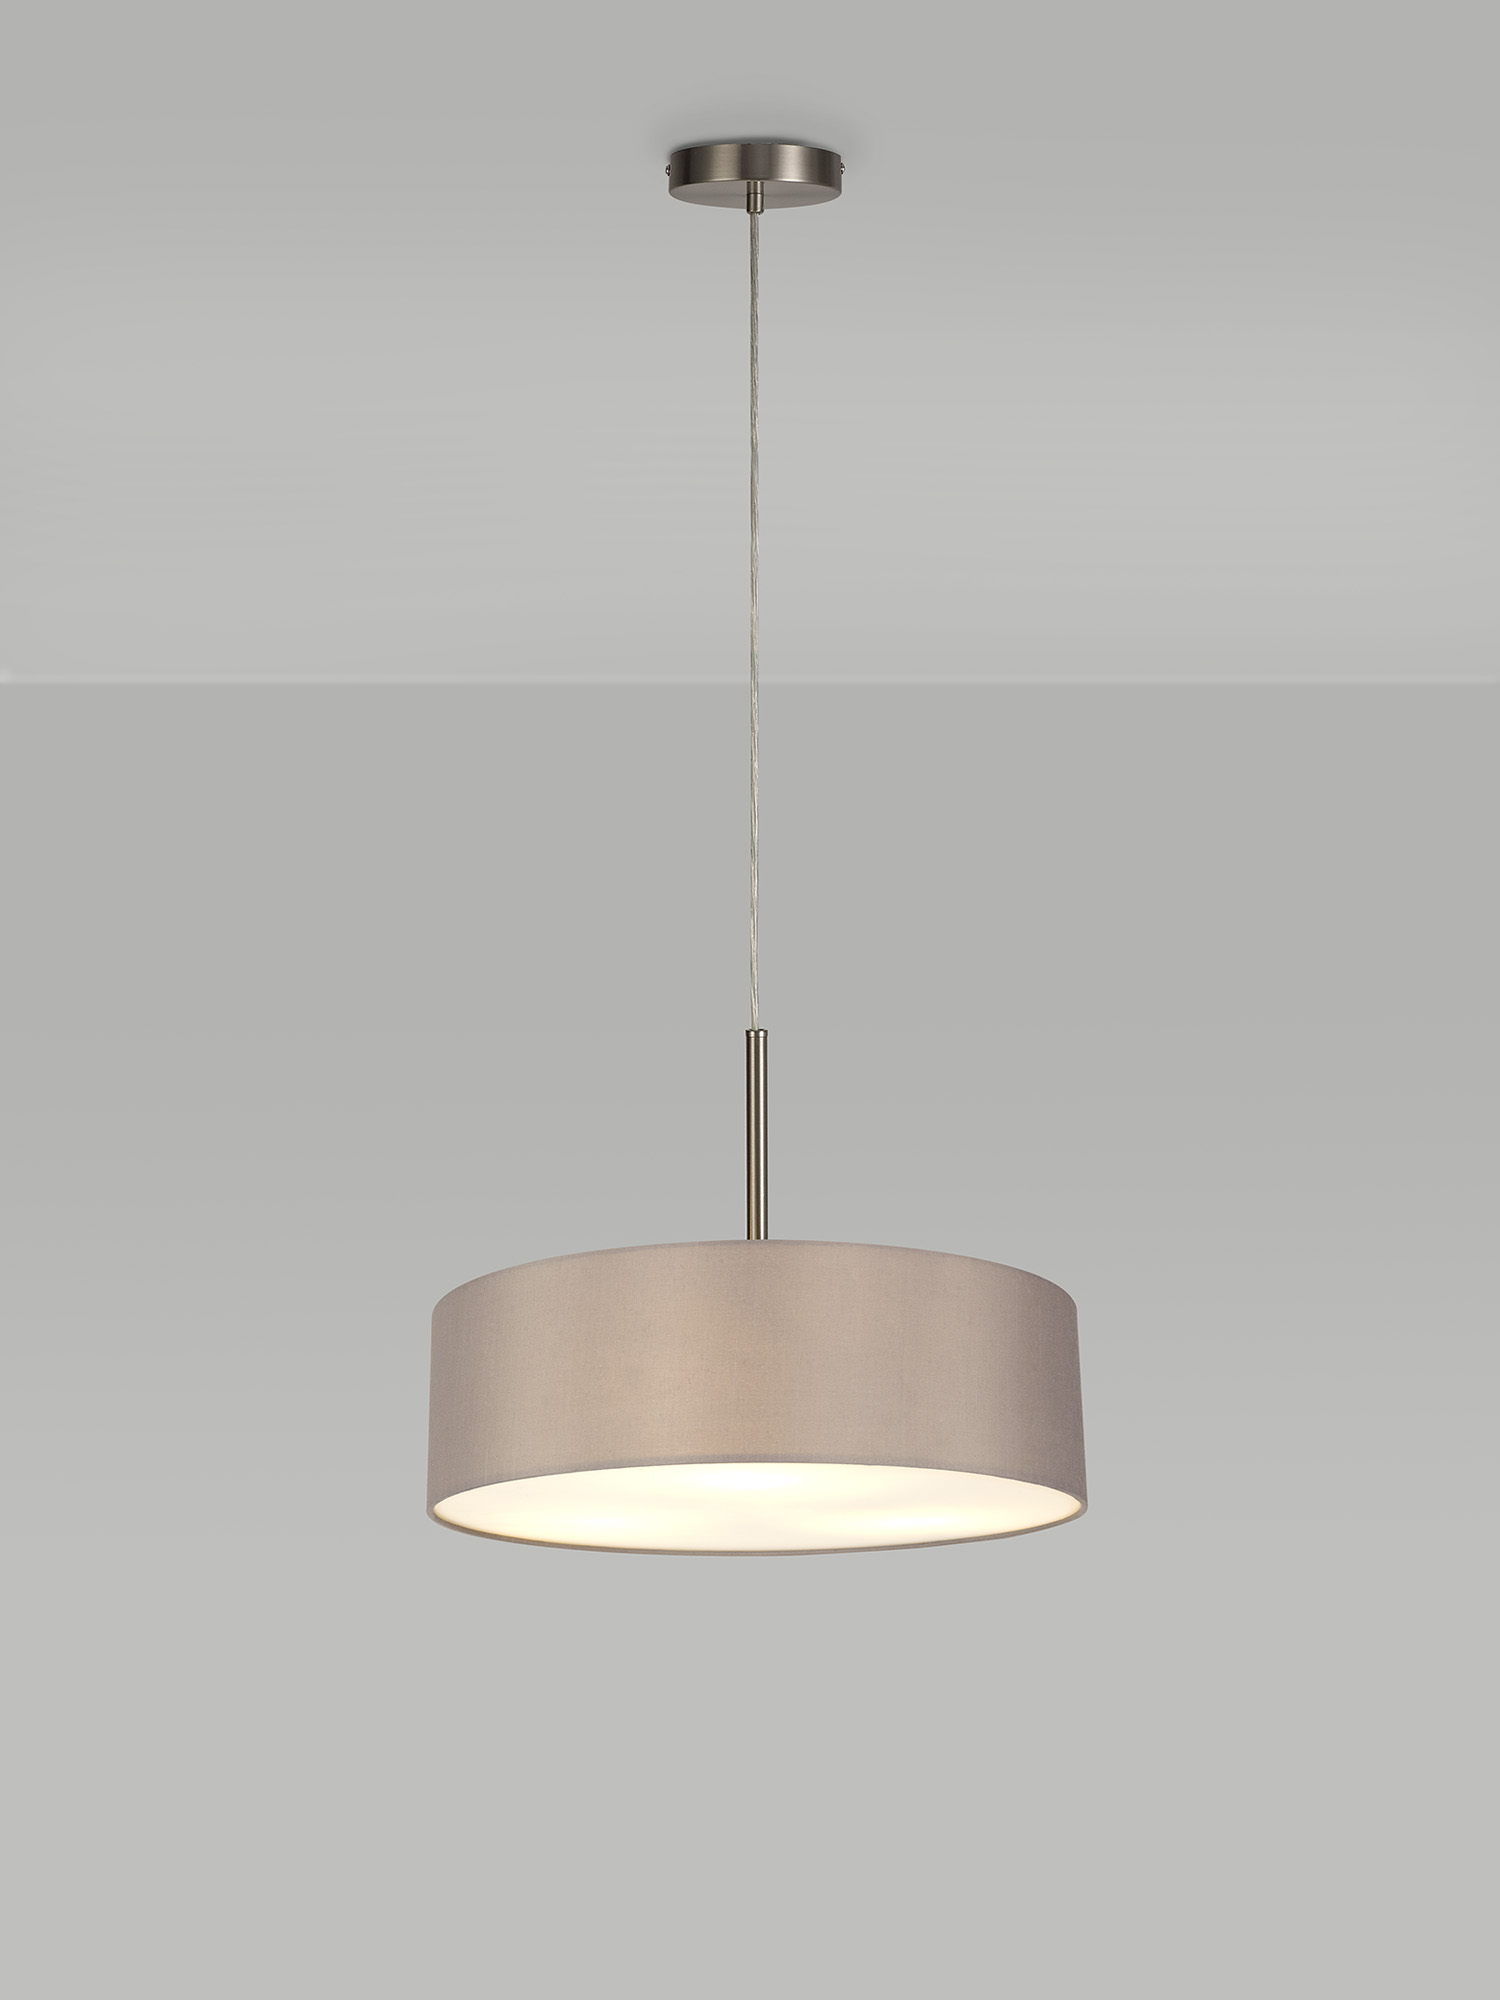 Baymont SN GR Ceiling Lights Deco Contemporary Ceiling Lights